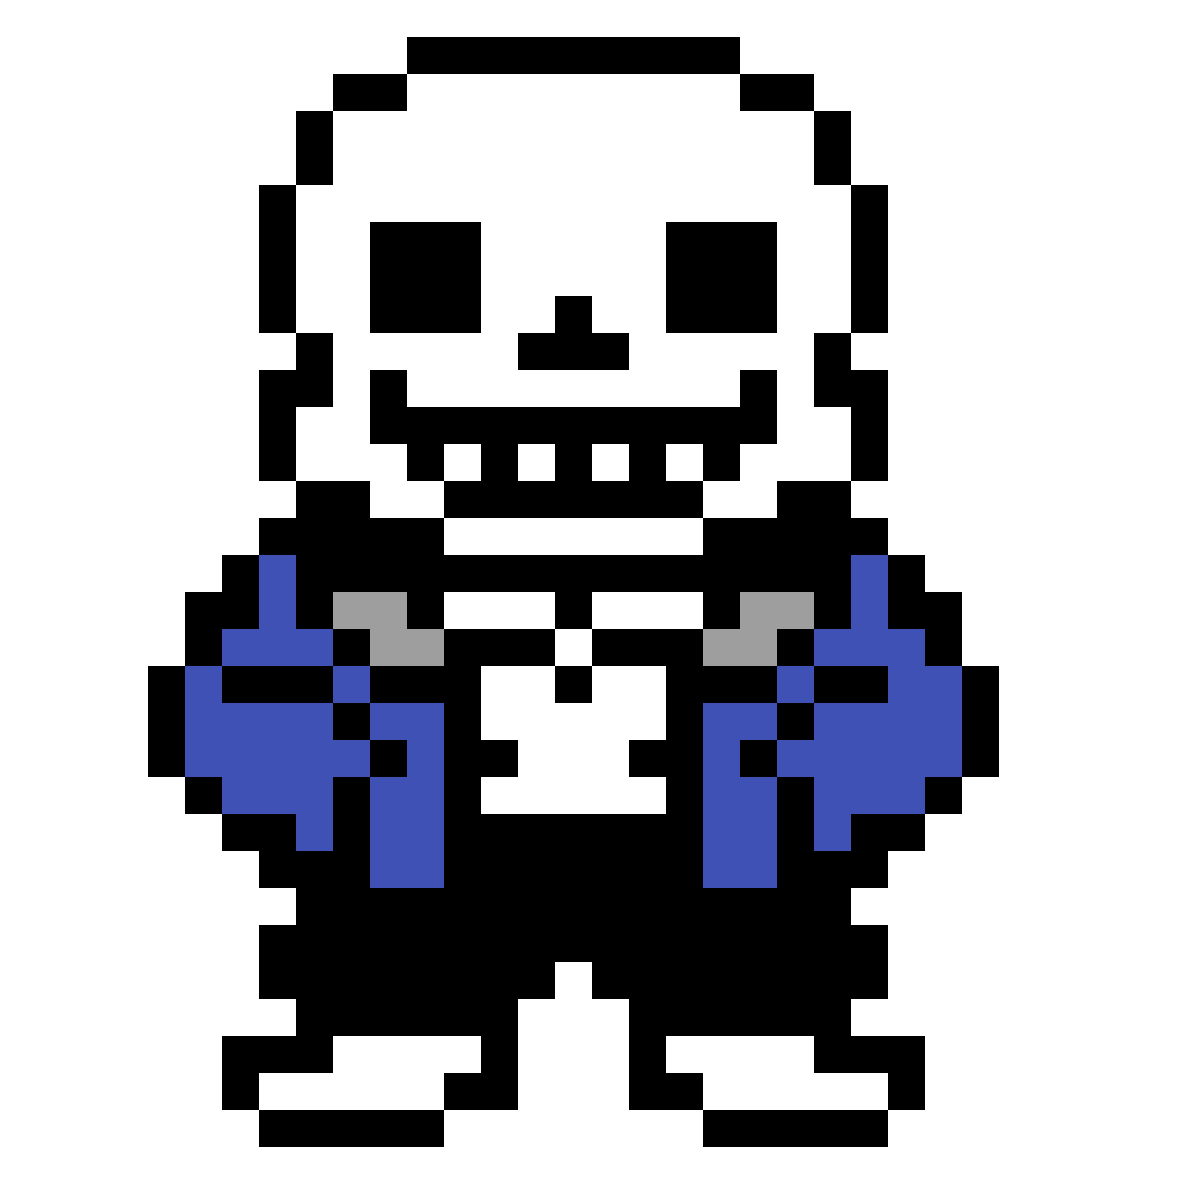 Download Sans Undertale Black Line White Sprite Hq Png Image In Different Resolution Freepngimg There's a lot more personality to sans in these custom sprites than the ones we get in undertale. freepngimg